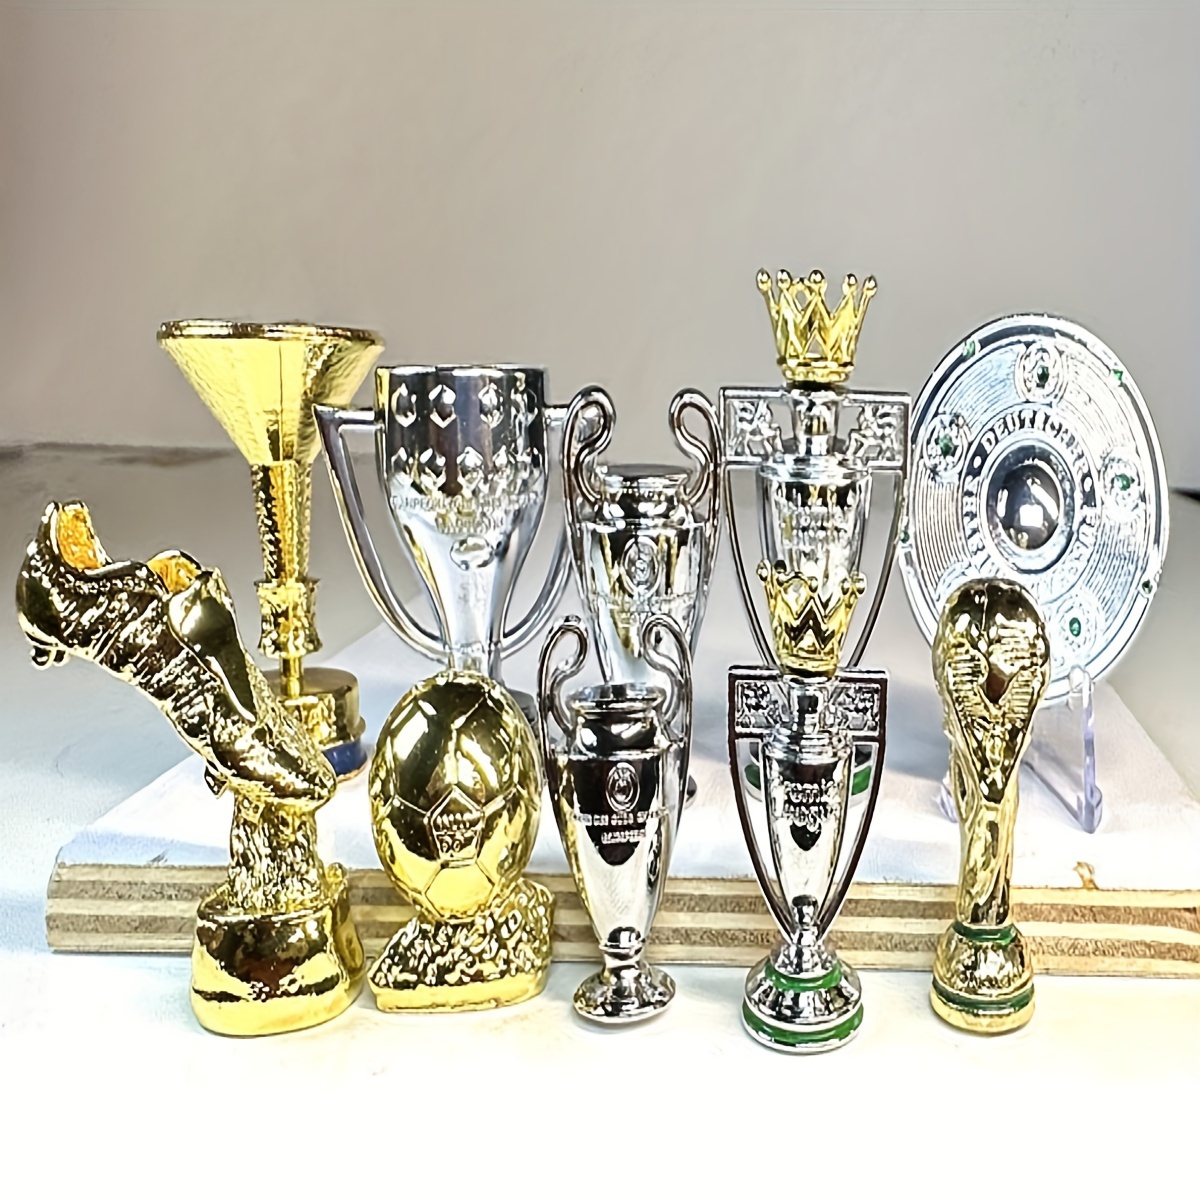 

1pc Random Selection Miniature Trophy - Alloy Champions Cup Replica, Football Collectible Figurines, Car Dashboard Decor, Home Ornament Accessories - Soccer, Serie A, Uefa,